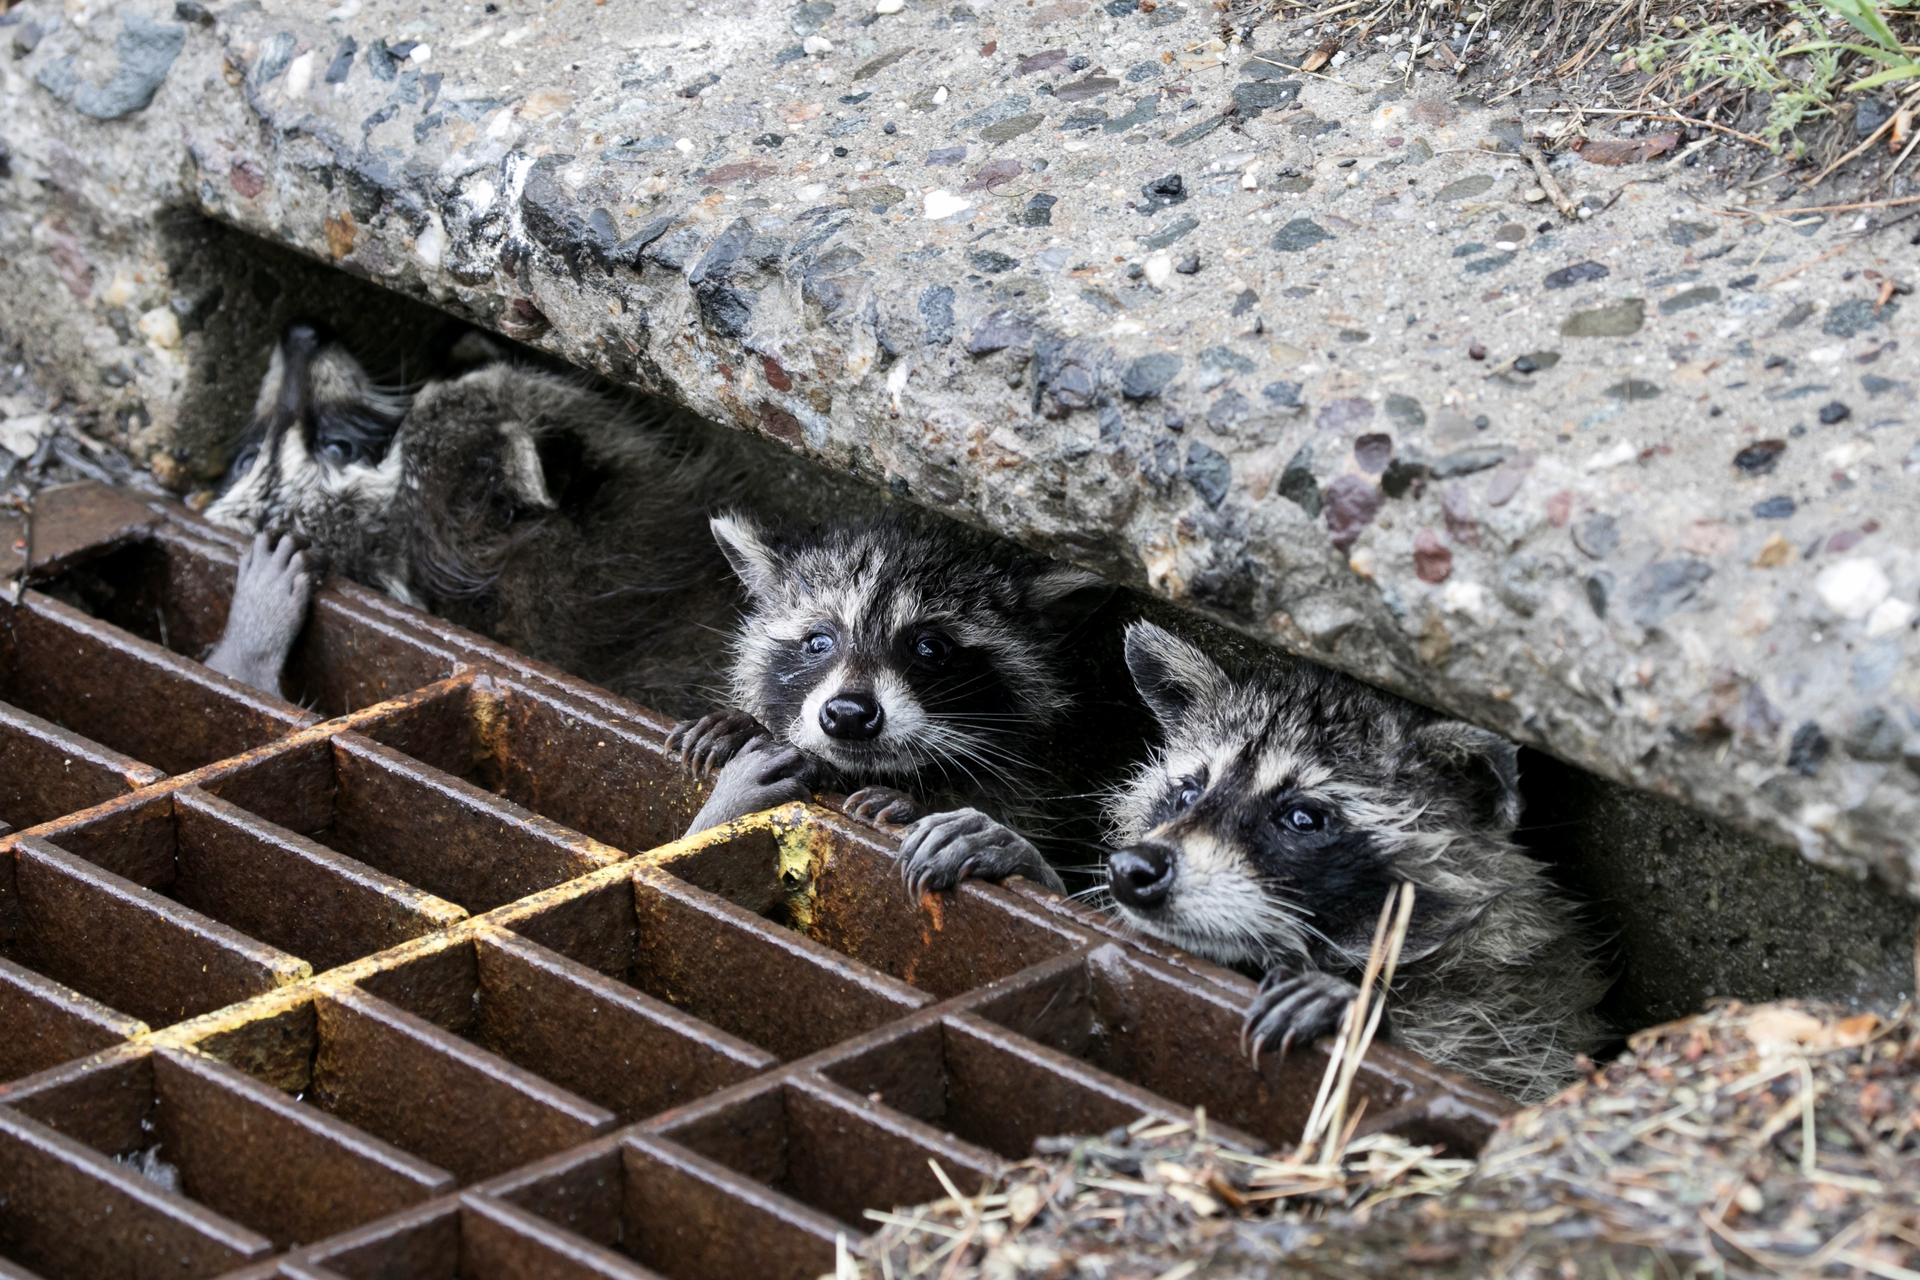 Four raccoons in a street gutter, handing onto the metal crate with their heads peaking out.